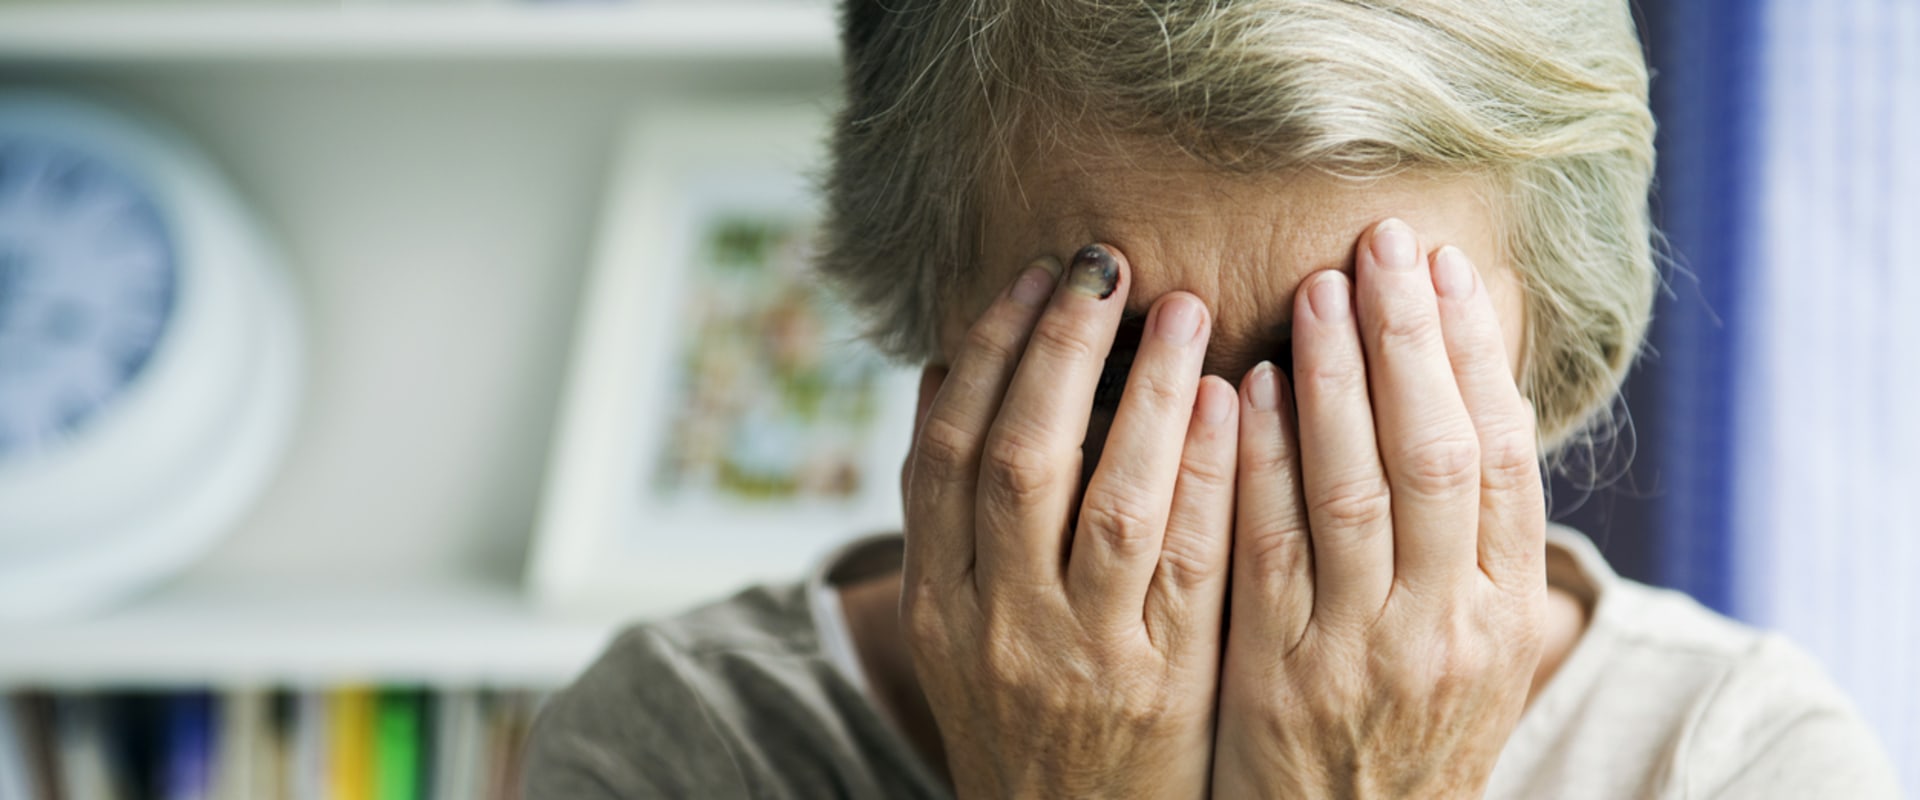 What are three signs of elder abuse?